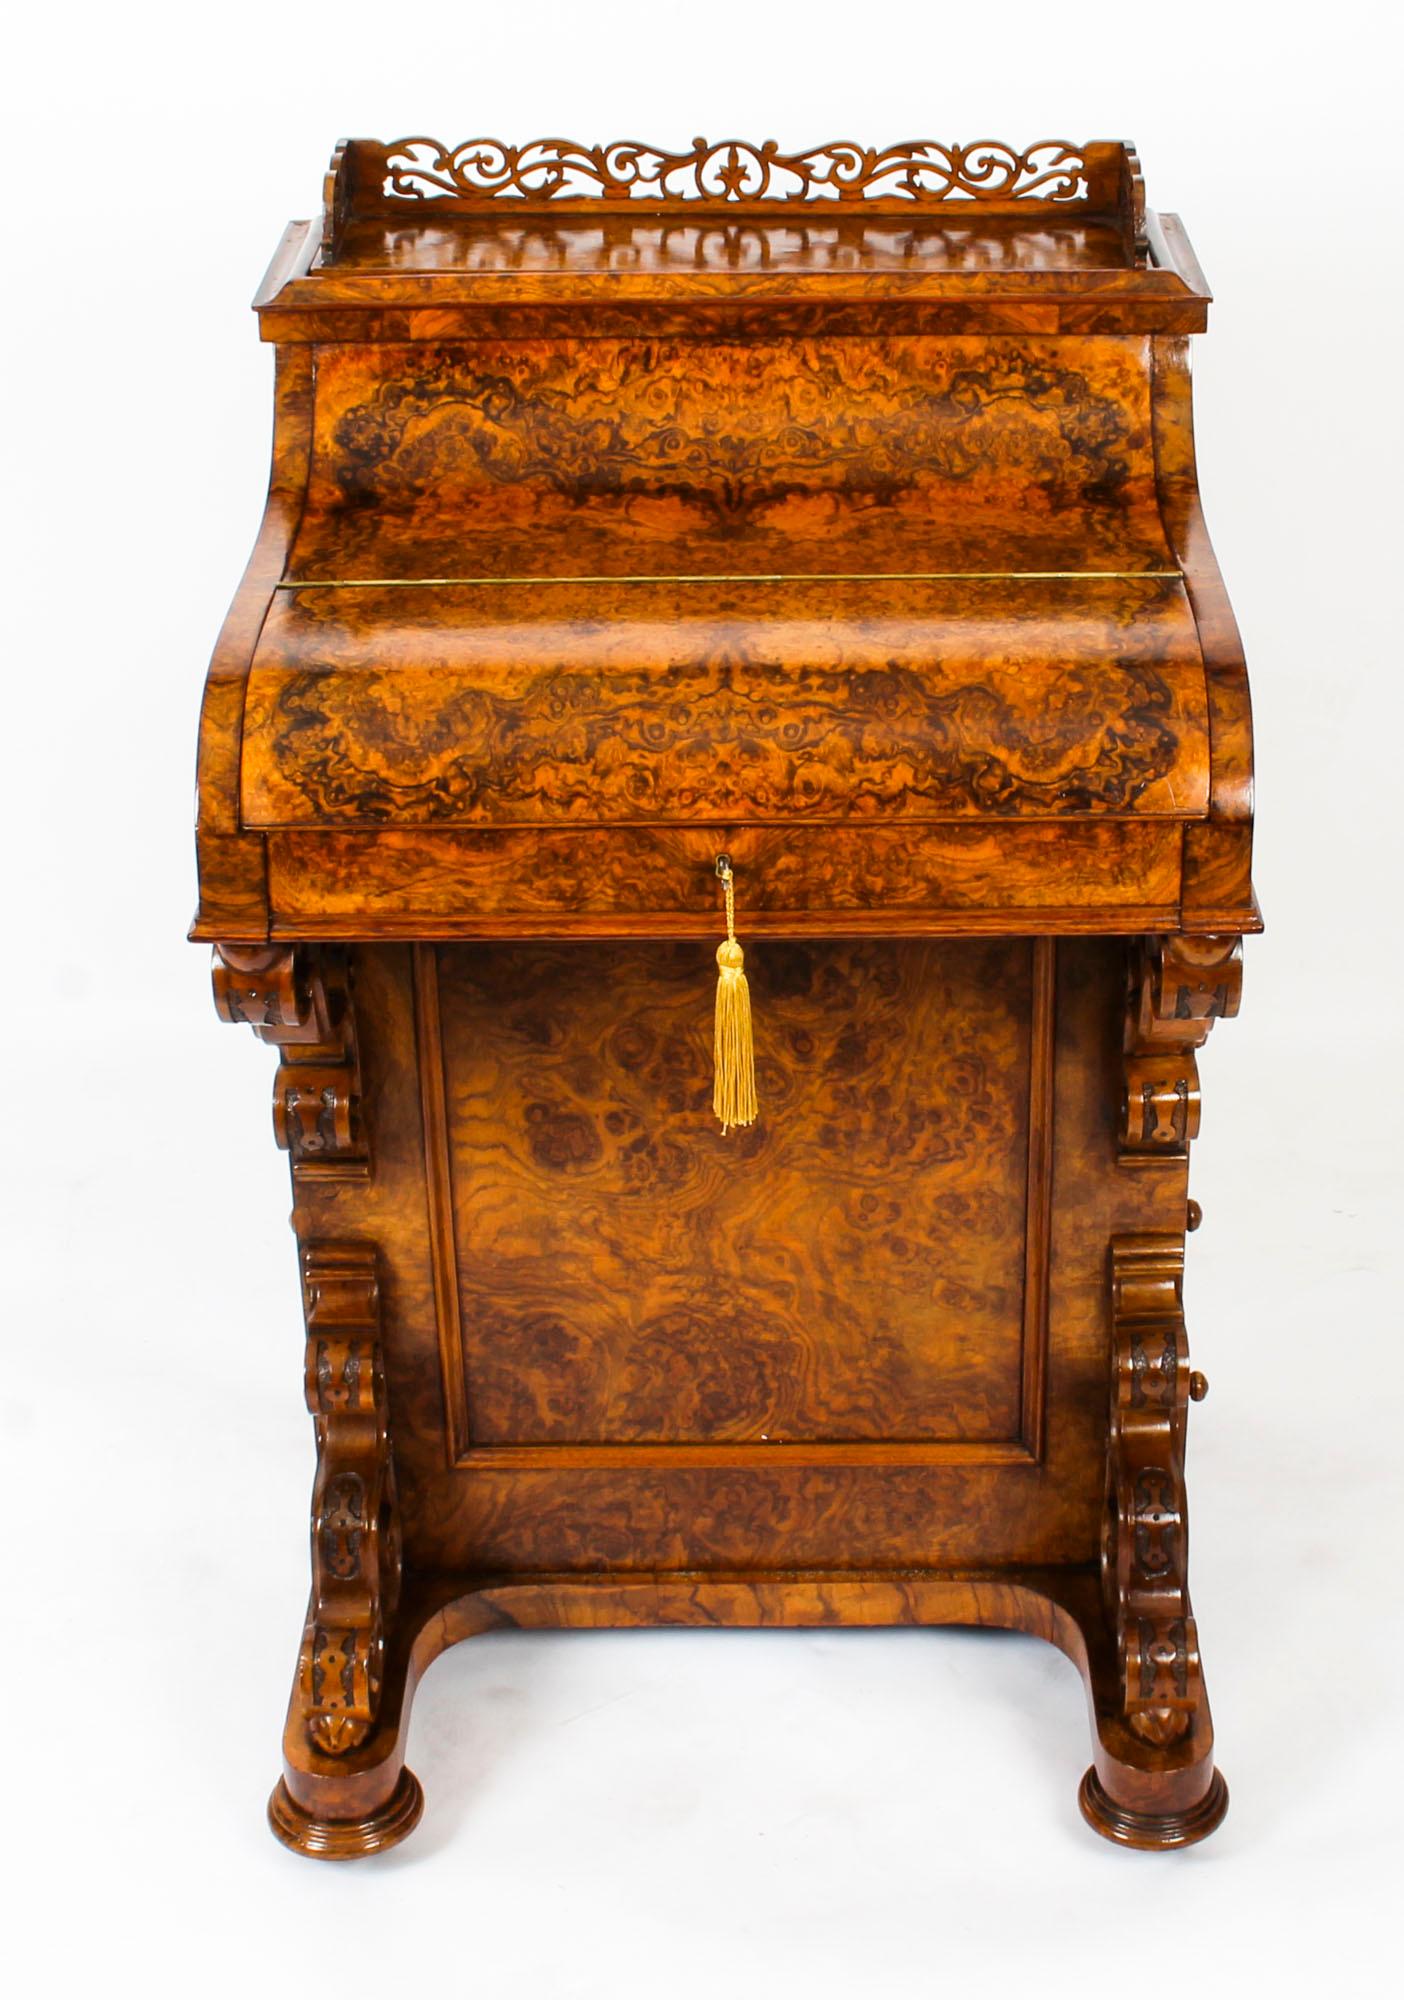 This is a gorgeous antique piano front Davenport Desk, circa 1860 in date.

It is crafted from fabulous burr walnut and the hinged pull out writing slope features the original inset gilt tooled navy leather writing surface, ink bottles and pen